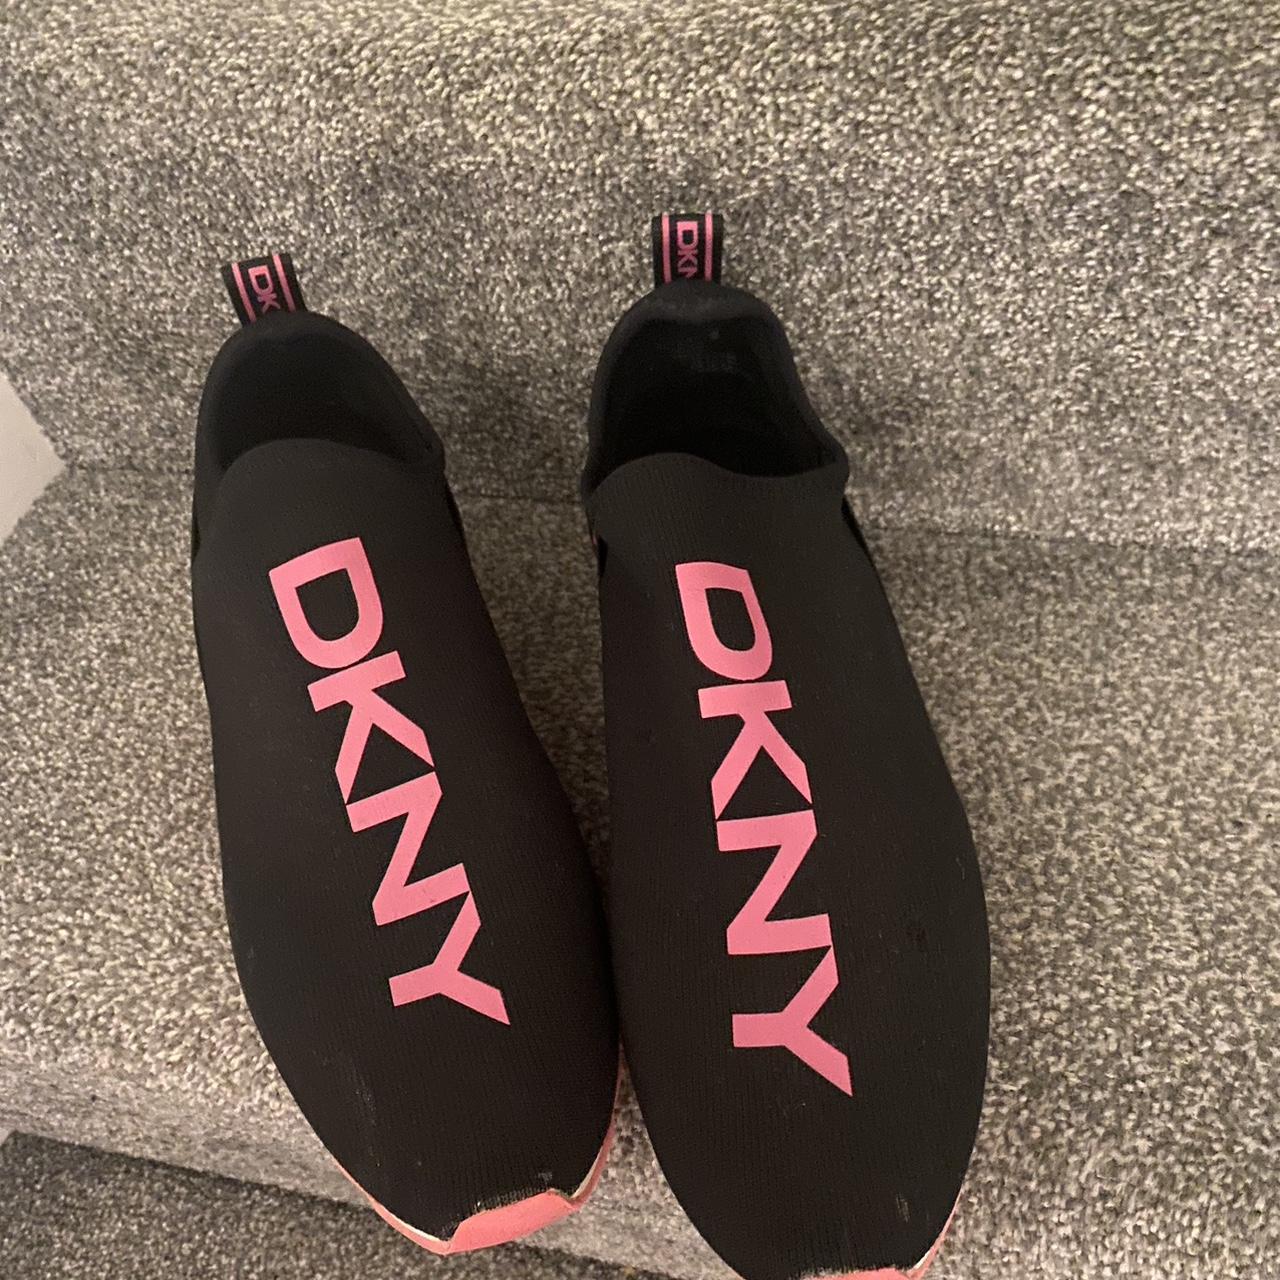 Pink and black dkny trainers size 8 Paid £50 used once - Depop